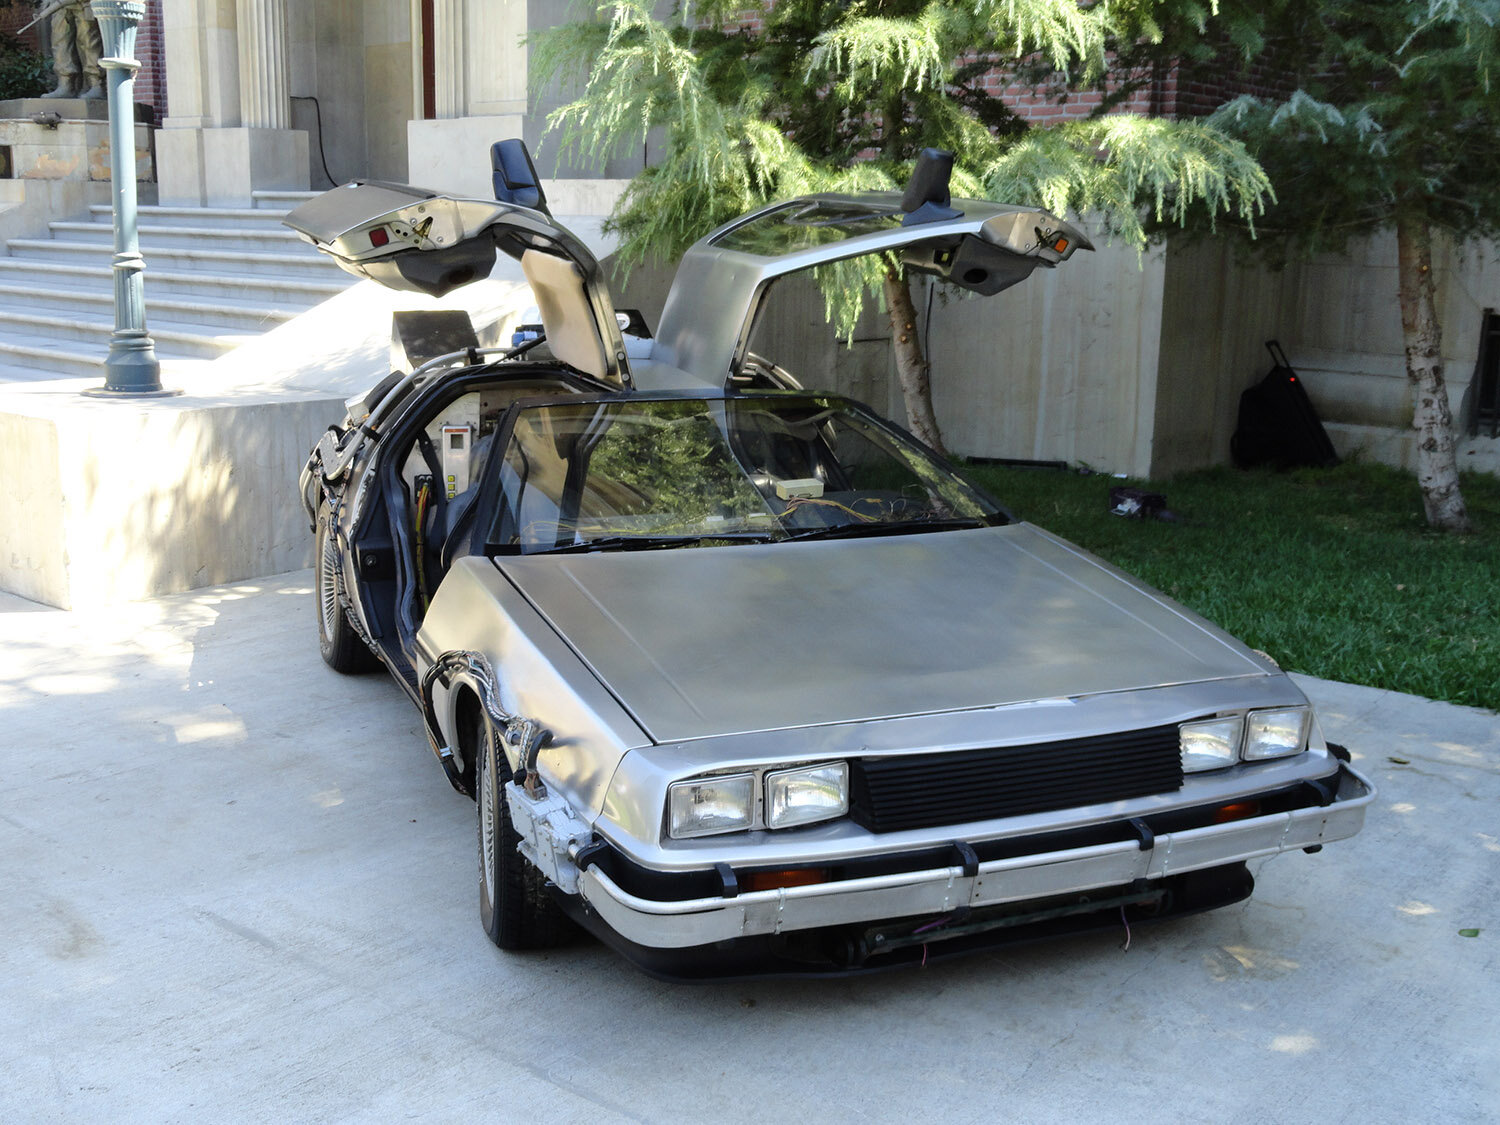  The "A" DeLorean Time Machine on display at Universal Studios for the Nike Mag press premiere September 8, 2011 (photo by Stephen Clark, ©2011, To Be Continued, LLC) 